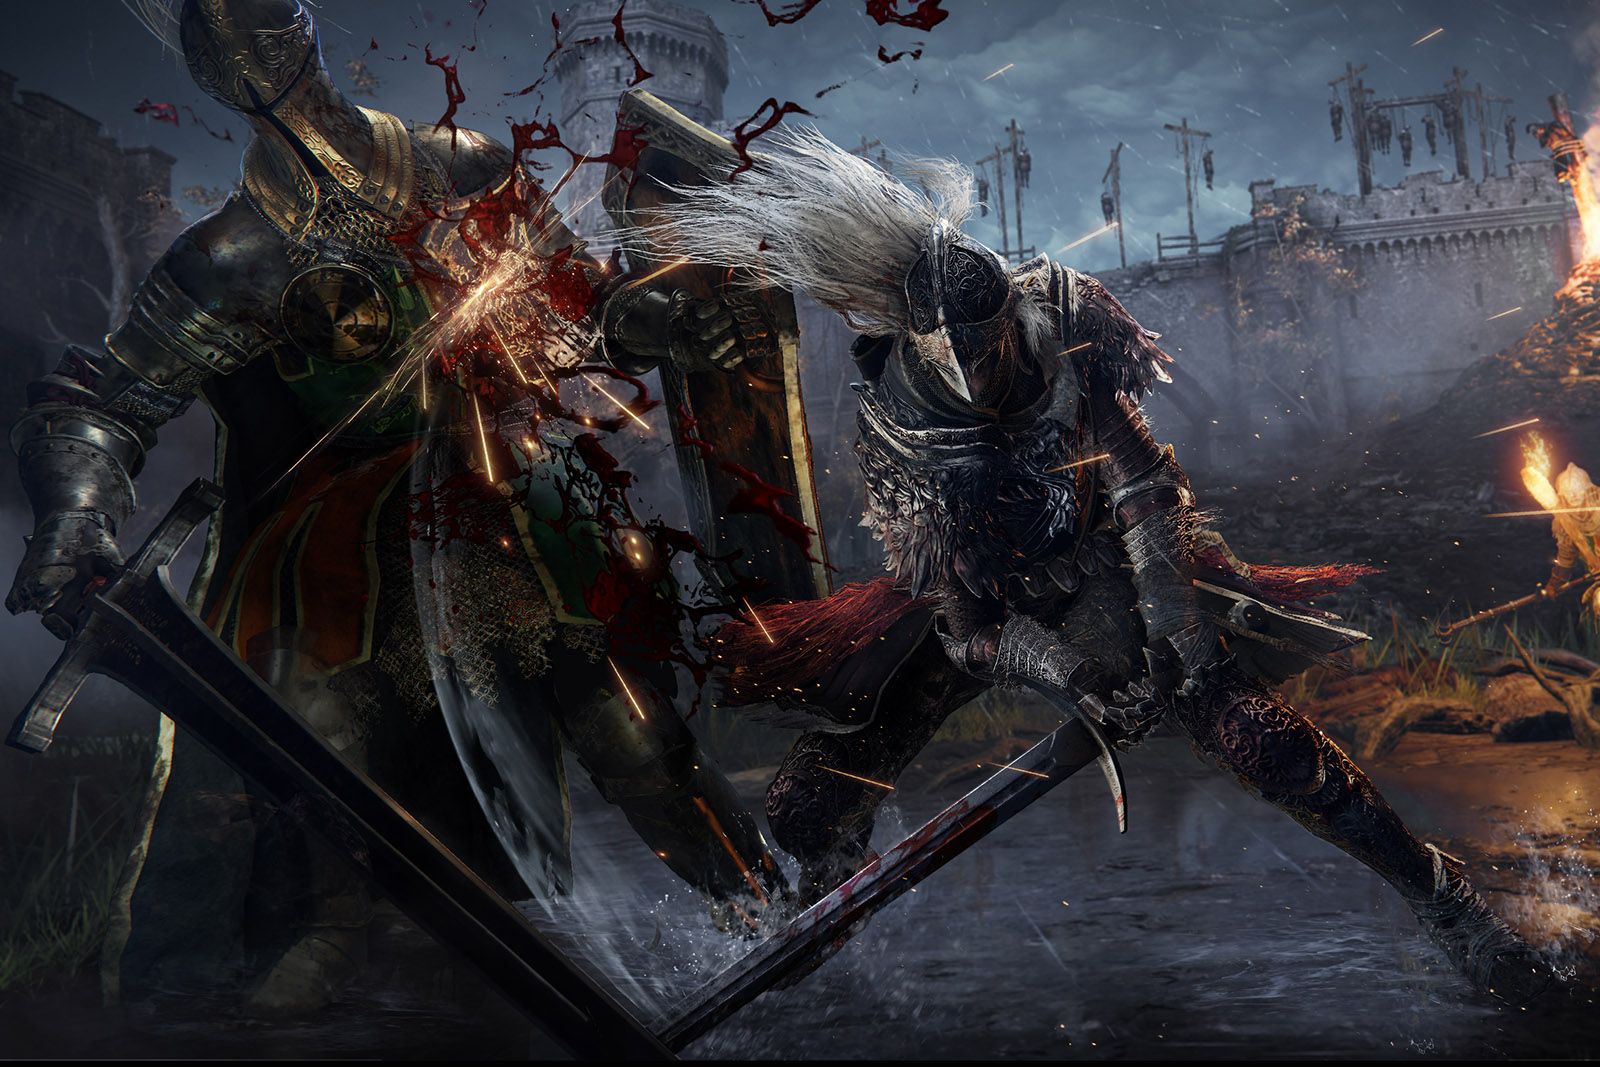 Elden Ring tips and tricks: Hints for getting started with FromSoftware's latest game photo 2